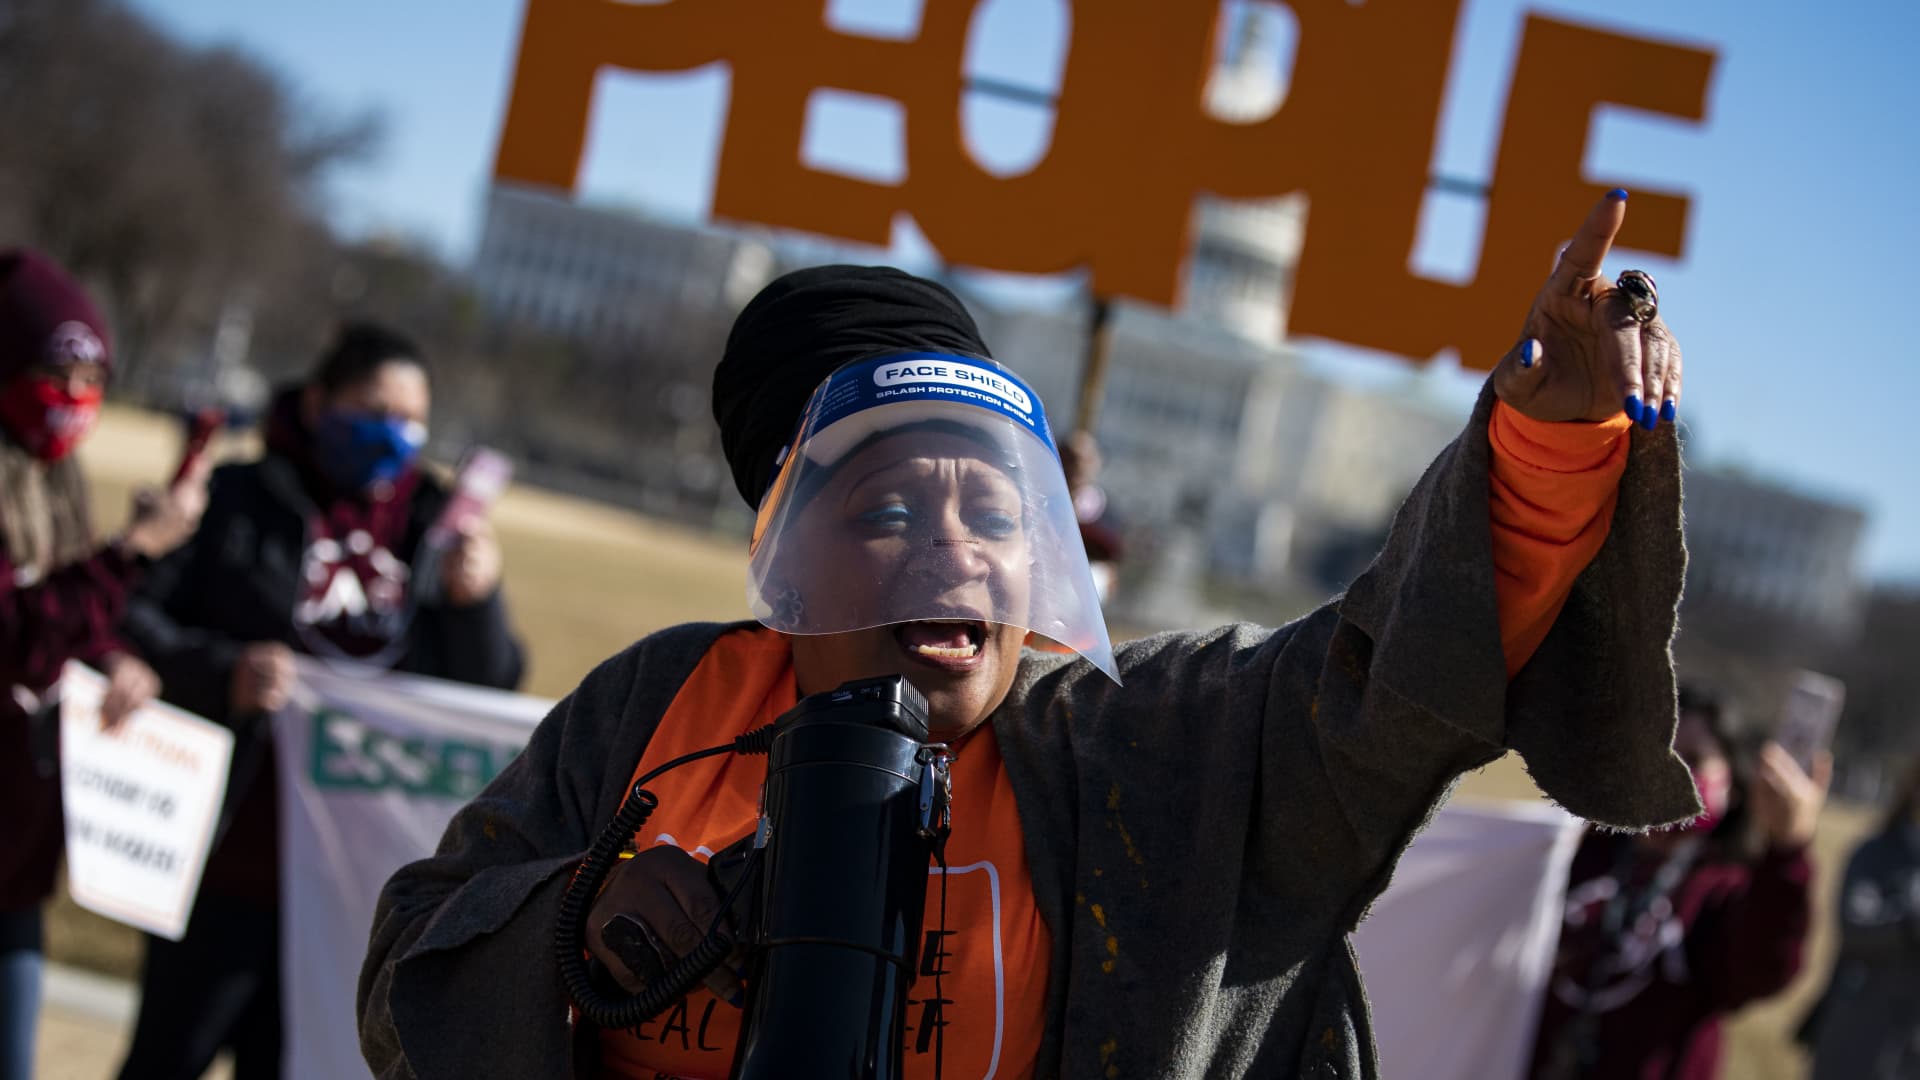 People rally during a demonstration in support of Covid-19 relief, organized by Shutdown DC, on the National Mall in Washington, D.C., on Feb. 25, 2021.